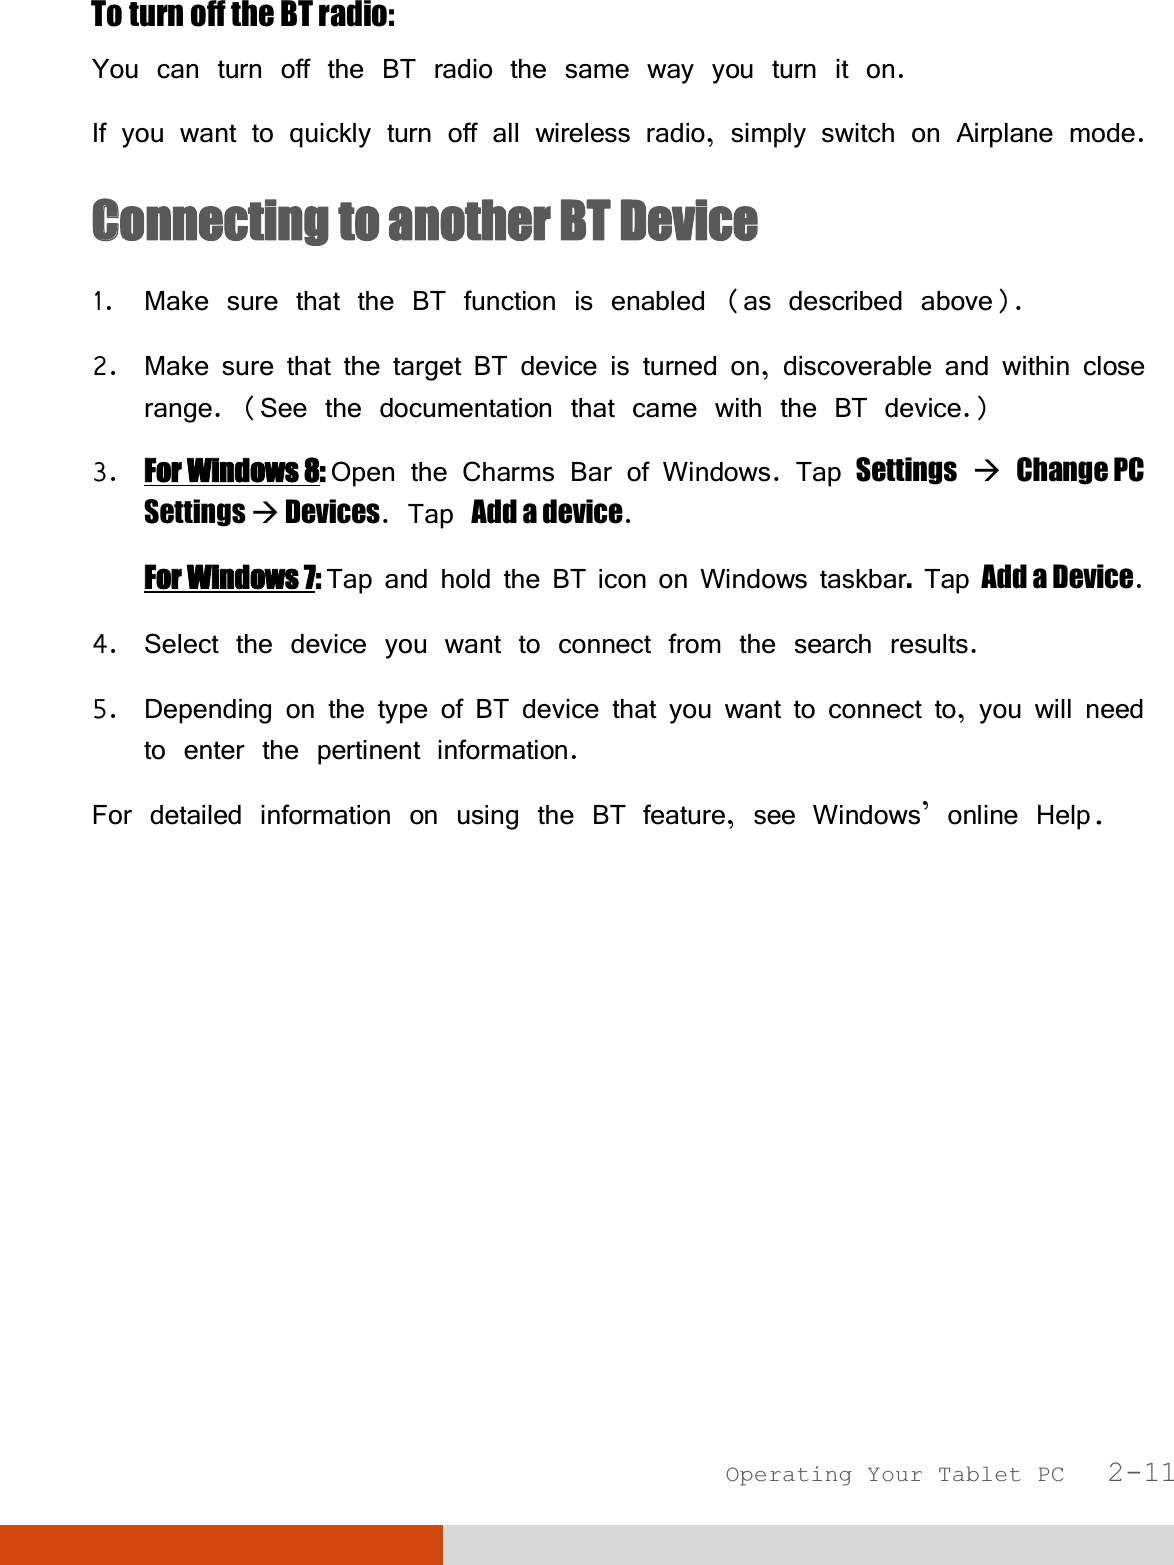  Operating Your Tablet PC   2-11 To turn off the BT radio: You can turn off the BT radio the same way you turn it on. If you want to quickly turn off all wireless radio, simply switch on Airplane mode. CConnecting to another BT Device  1. Make sure that the BT function is enabled (as described above). 2. Make sure that the target BT device is turned on, discoverable and within close range. (See the documentation that came with the BT device.) 3. For Windows 8: Open the Charms Bar of Windows. Tap Settings  Change PC Settings  Devices. Tap Add a device. For Windows 7: Tap and hold the BT icon on Windows taskbar. Tap Add a Device. 4. Select the device you want to connect from the search results. 5. Depending on the type of BT device that you want to connect to, you will need to enter the pertinent information. For detailed information on using the BT feature, see Windows’ online Help. 